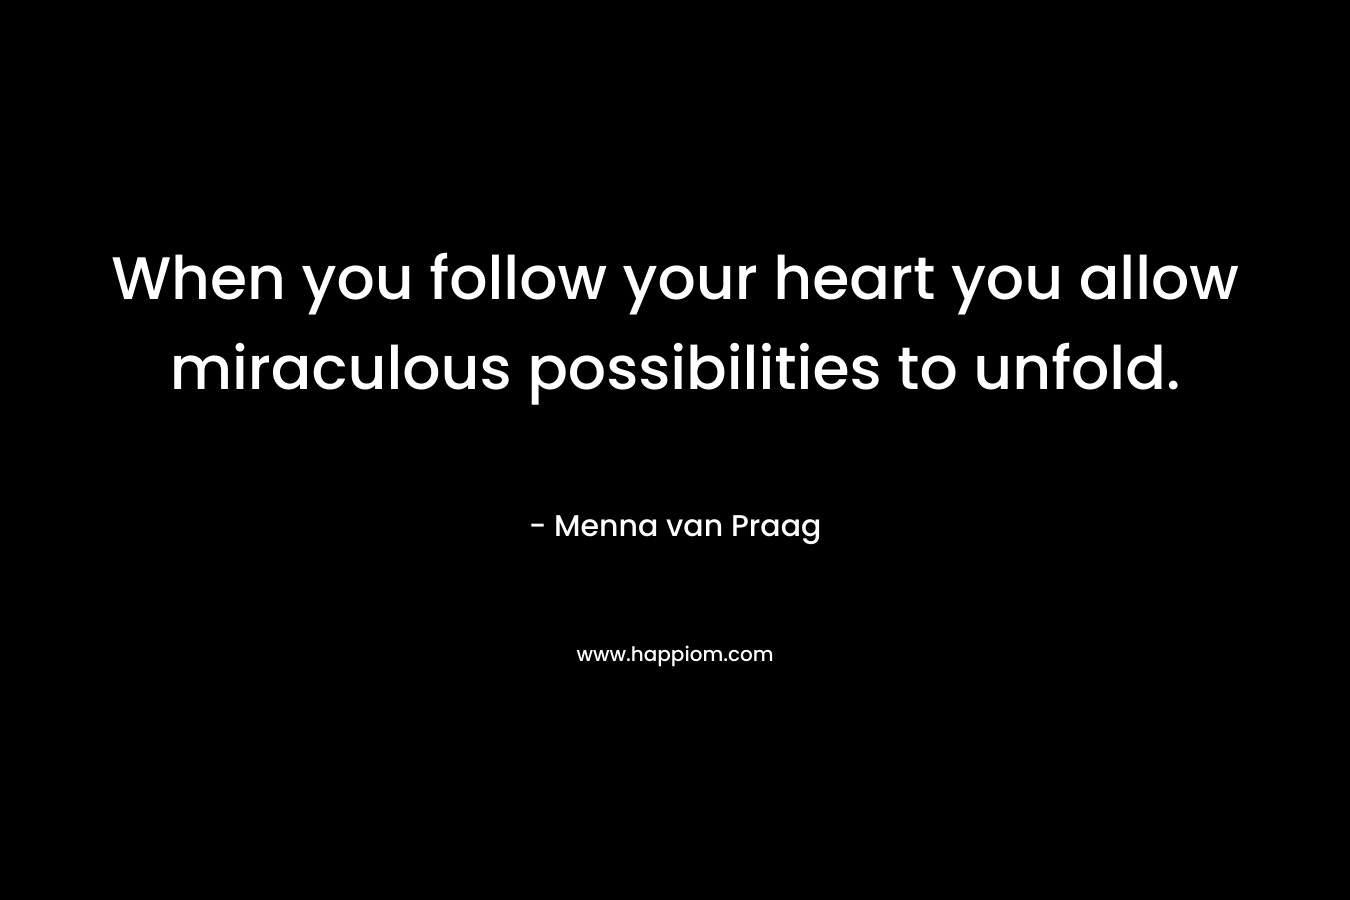 When you follow your heart you allow miraculous possibilities to unfold.